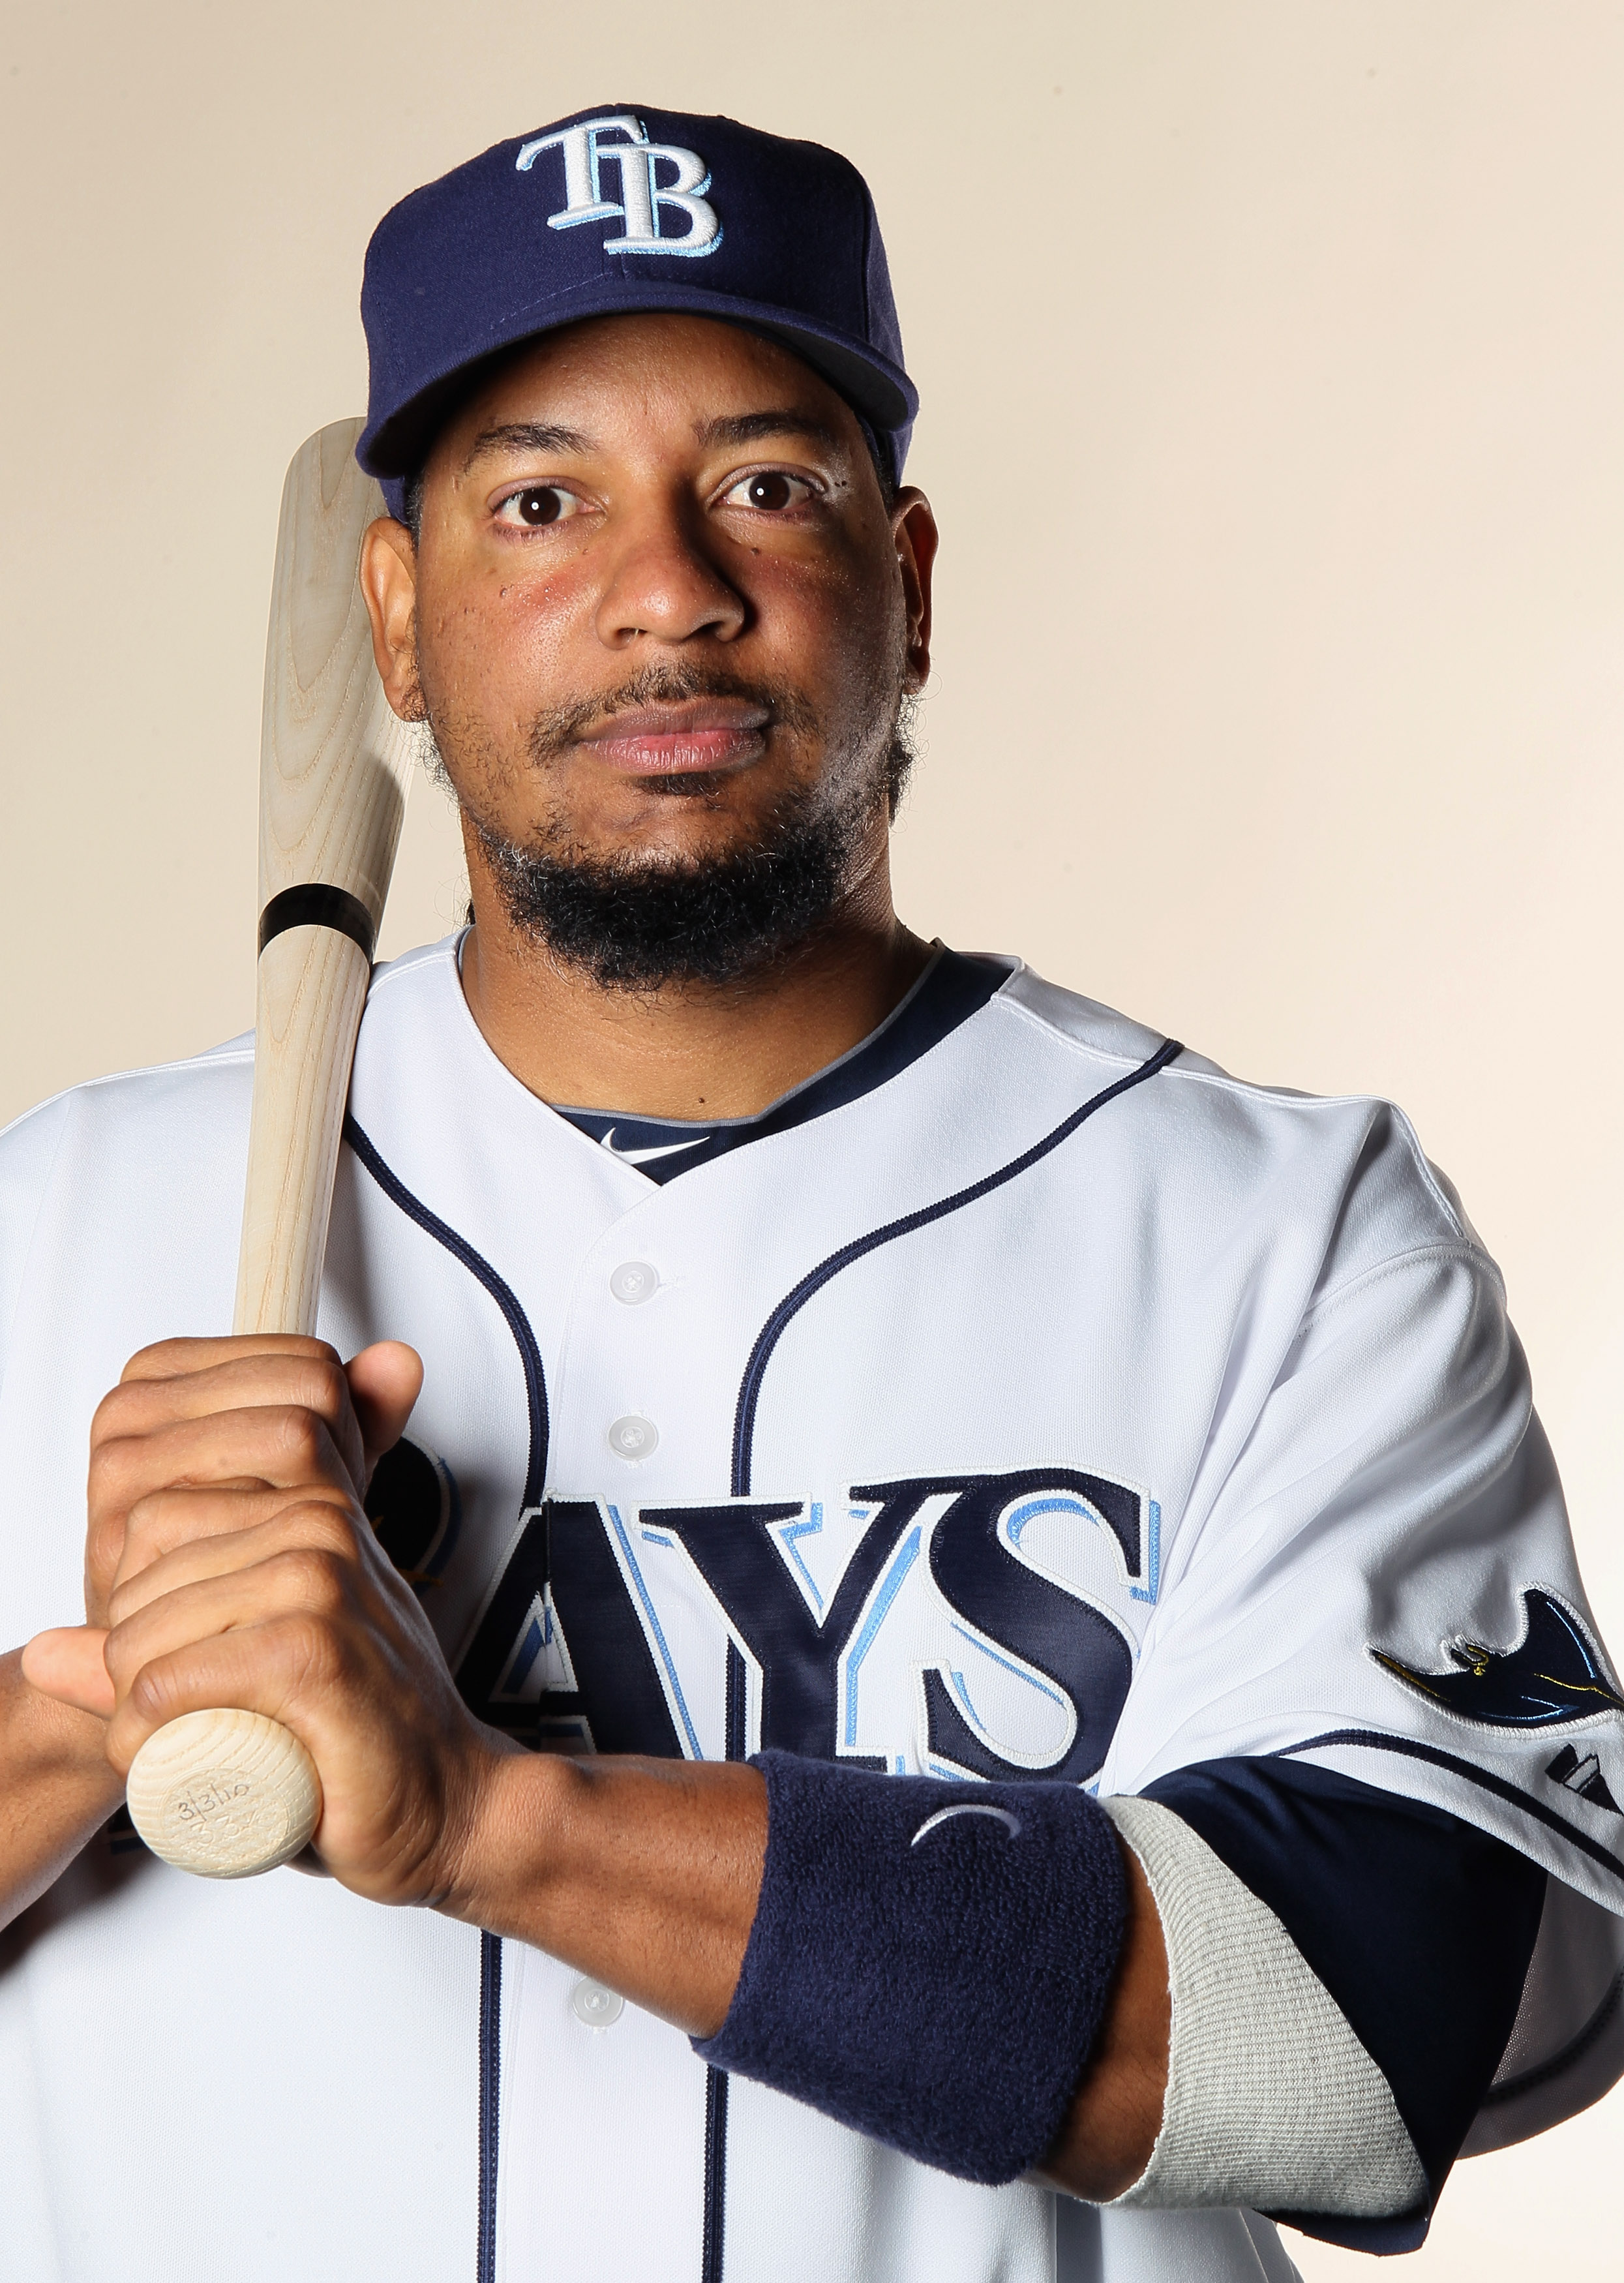 FT. MYERS, FL - FEBRUARY 22:  Manny Ramirez #24 of the Tampa Bay Rays poses for a portrait during the Tampa Bay Rays Photo Day on February 22, 2011 at the Charlotte Sports Complex in Port Charlotte, Florida.  (Photo by Elsa/Getty Images)